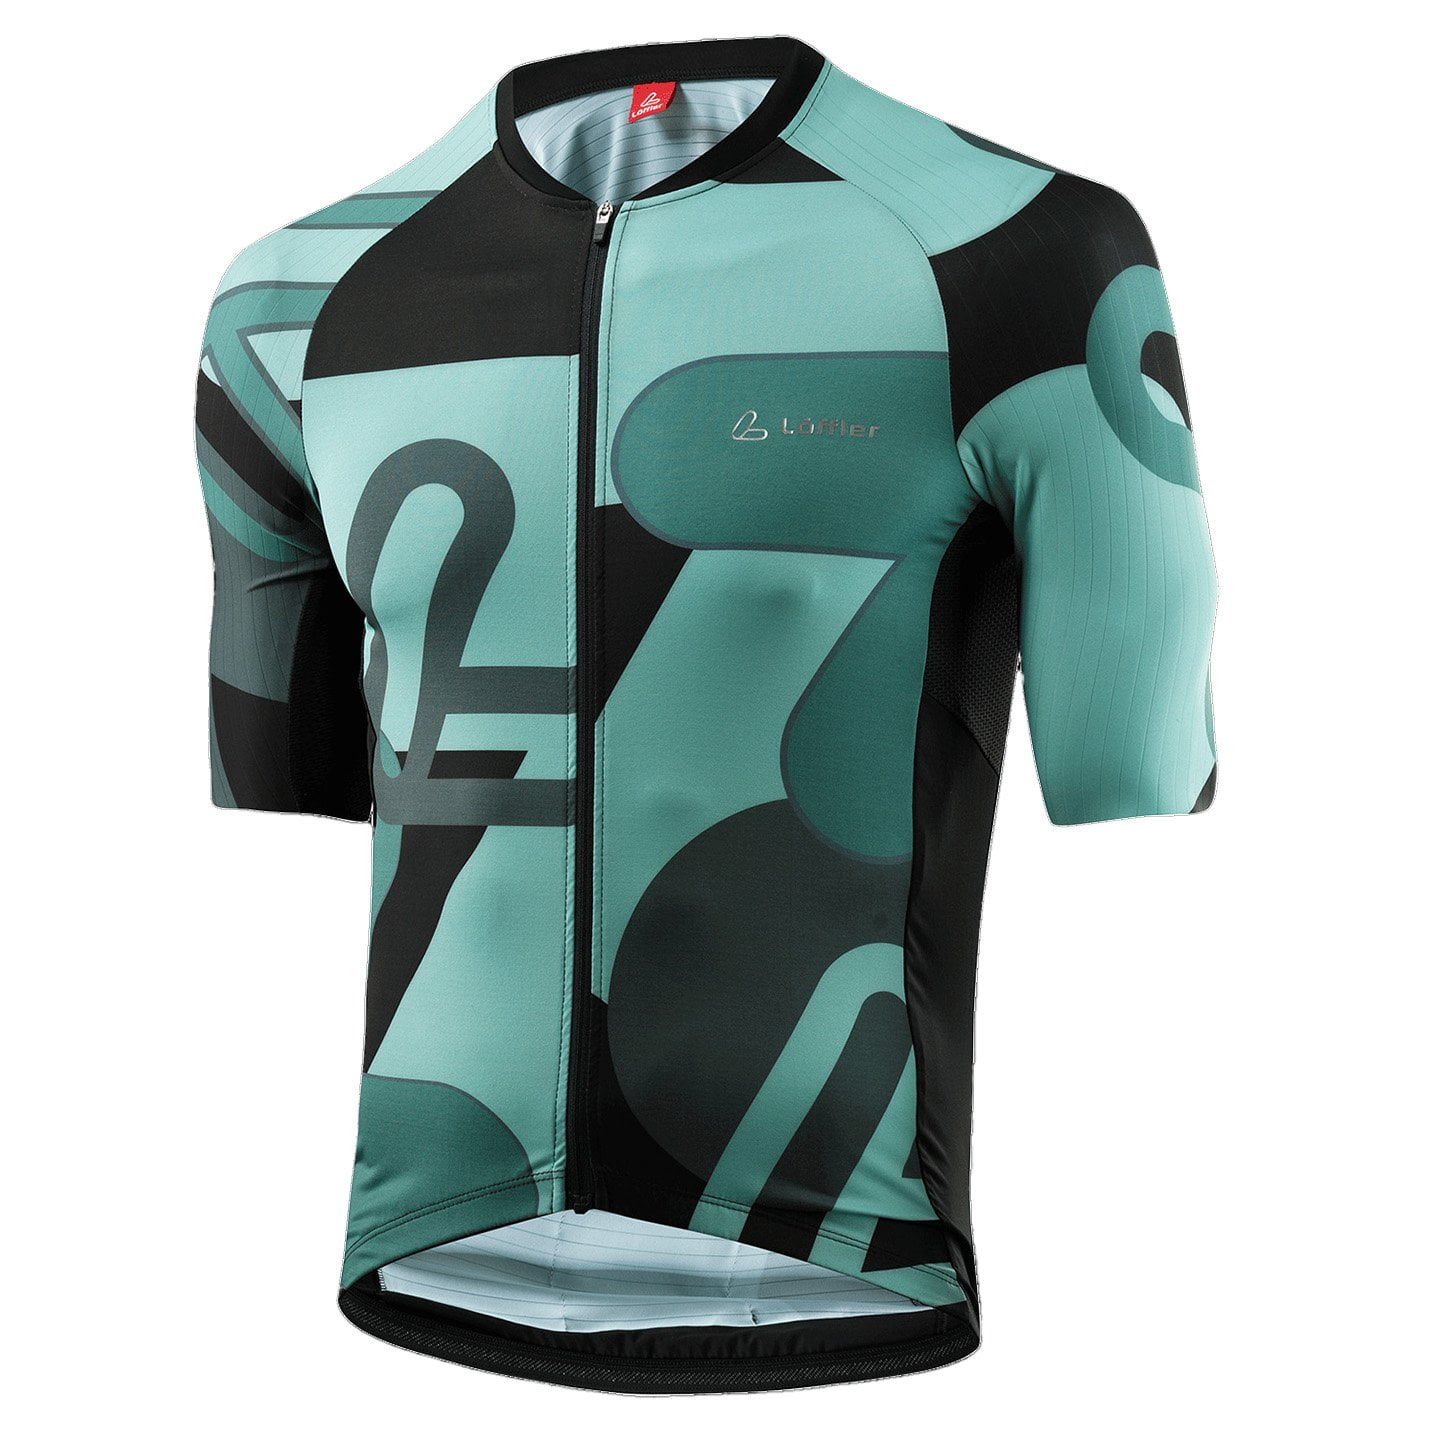 LOFFLER Statement Elite Short Sleeve Jersey, for men, size S, Cycling jersey, Cycling clothing